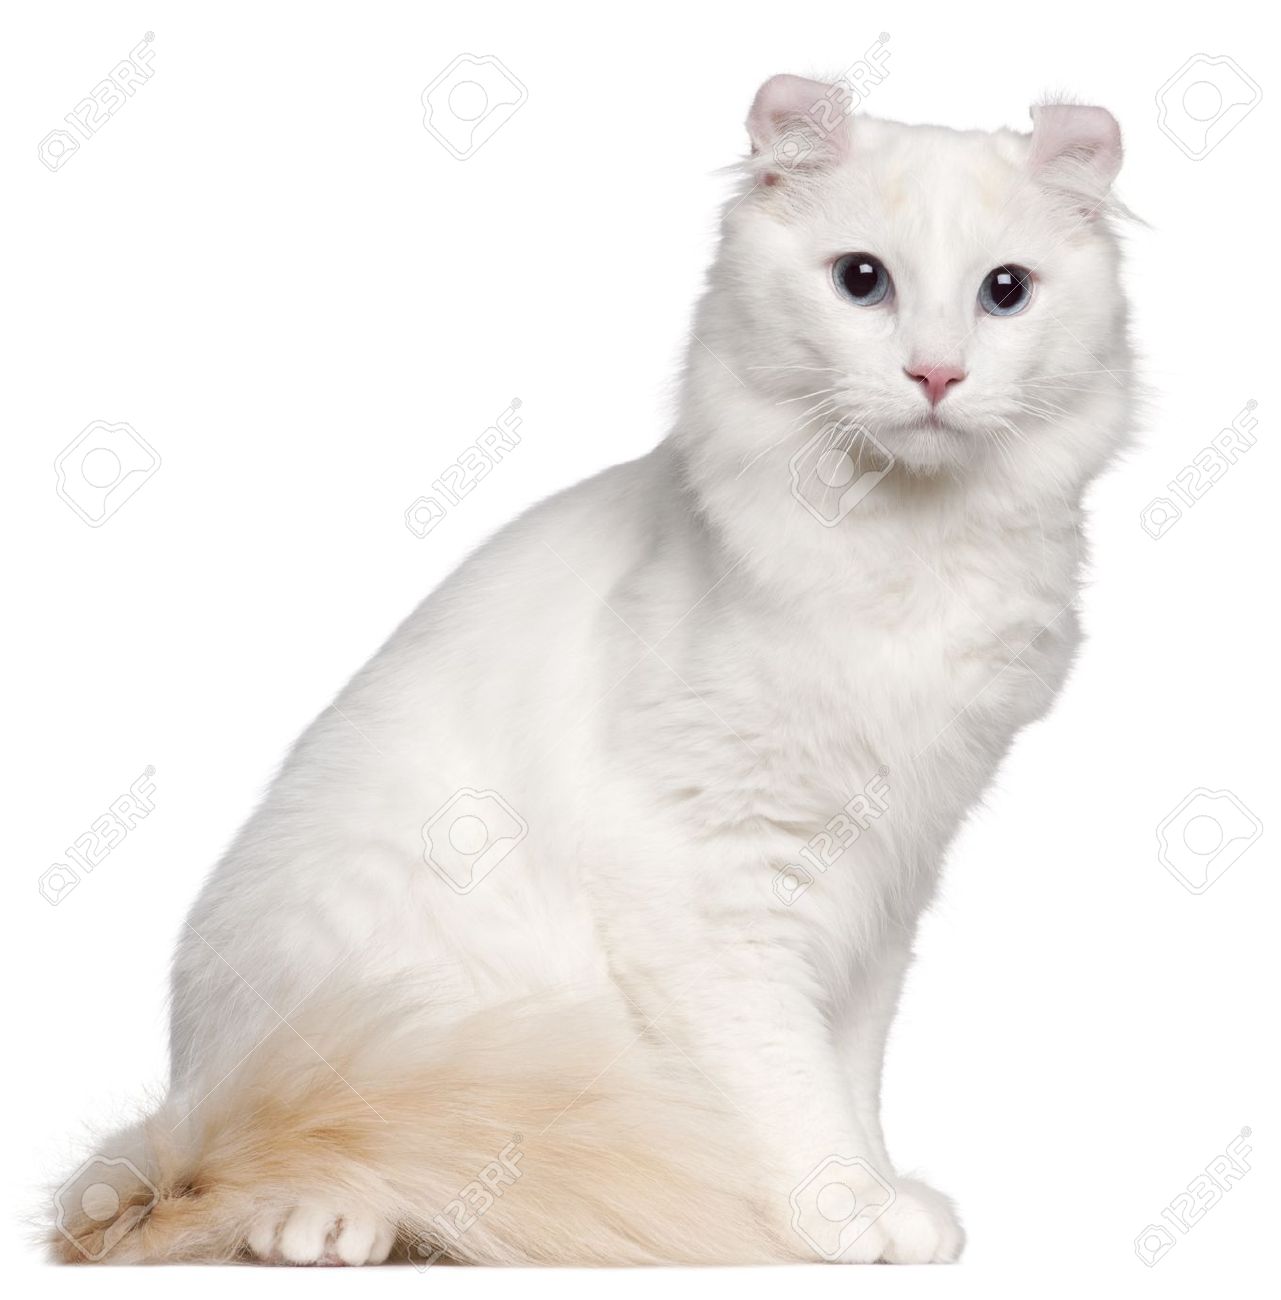 Awesome White American Curl Cat Sitting Picture